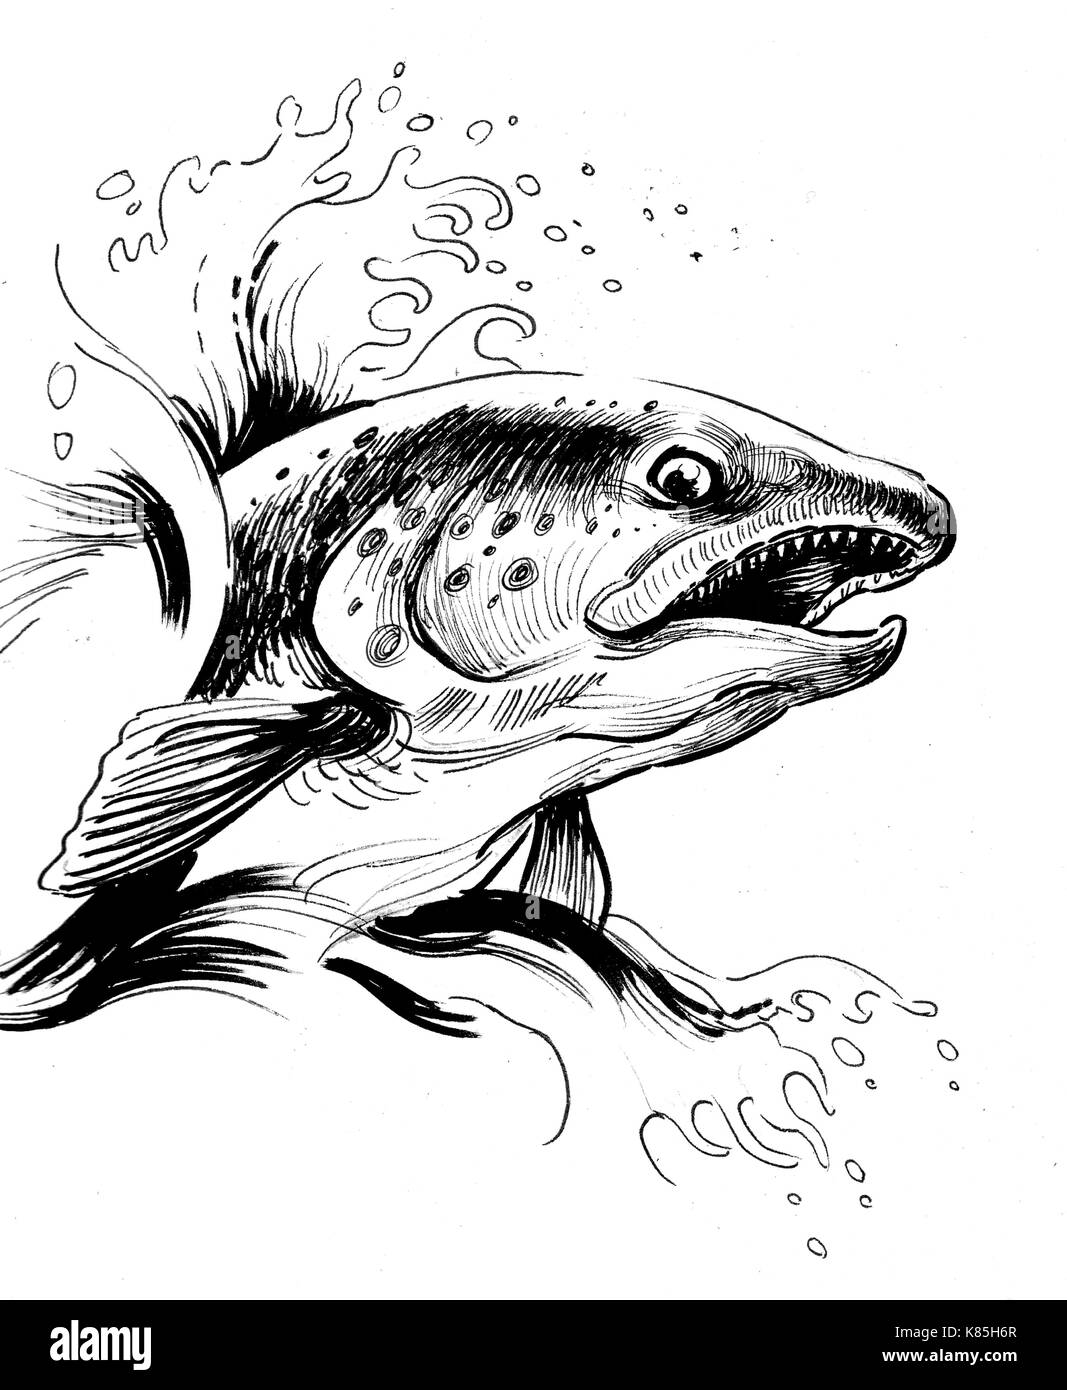 Jumping salmon fish. Ink black and white drawing Stock Photo